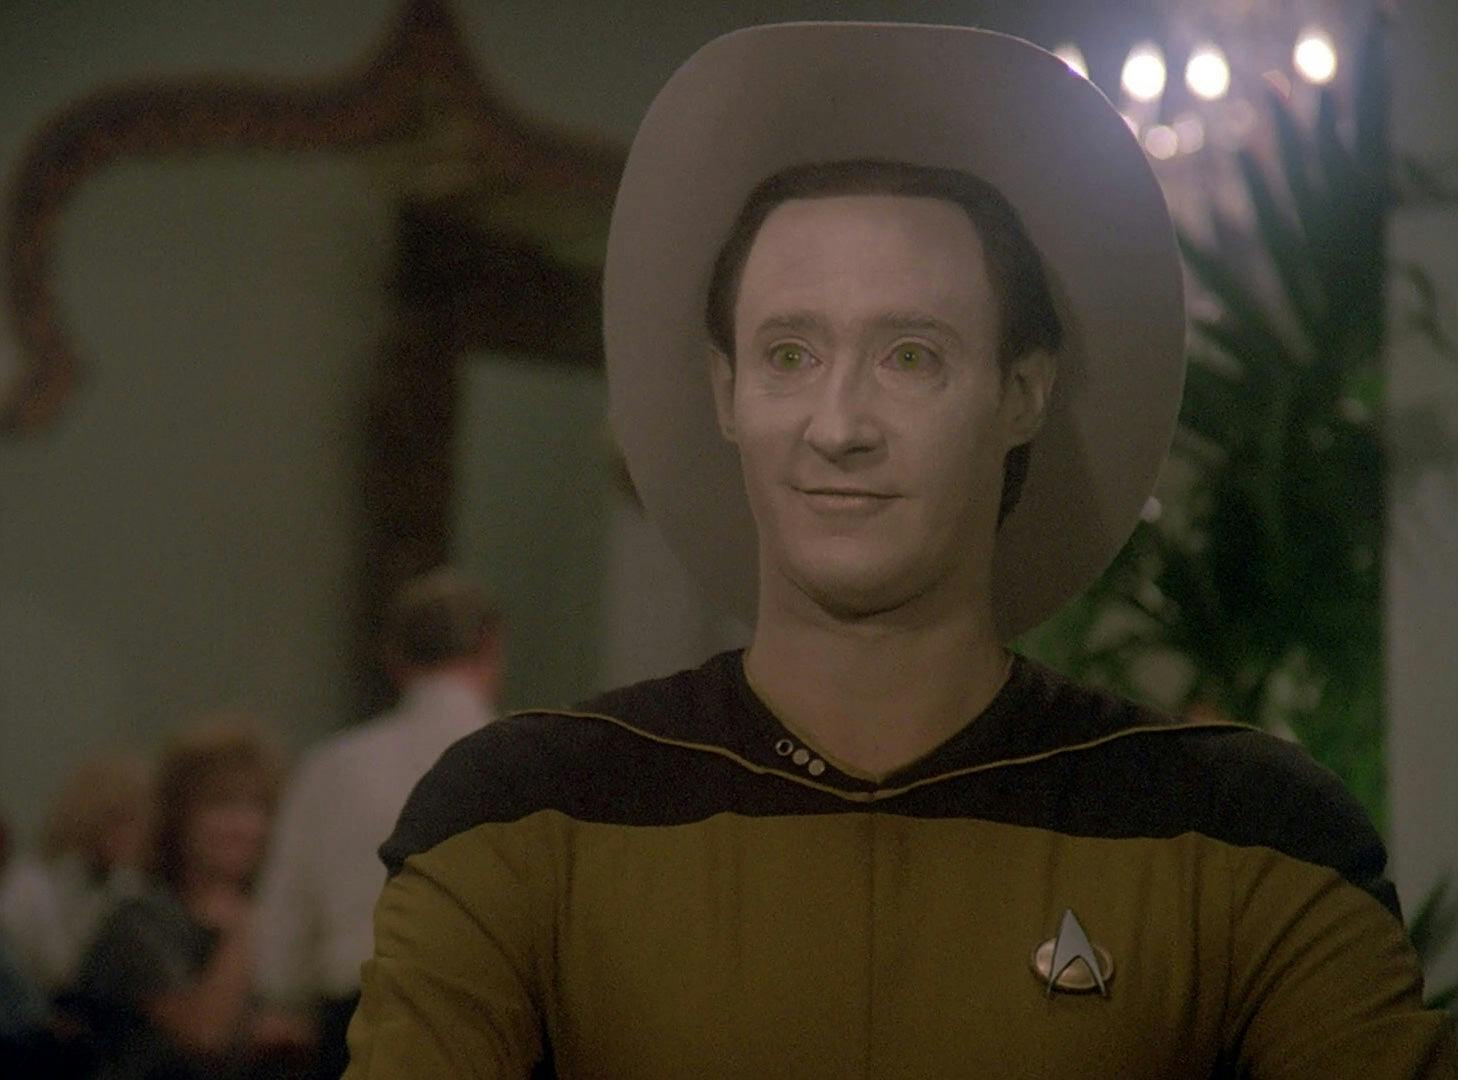 Data looks excited after winning blackjack, all while wearing a cowboy hat.